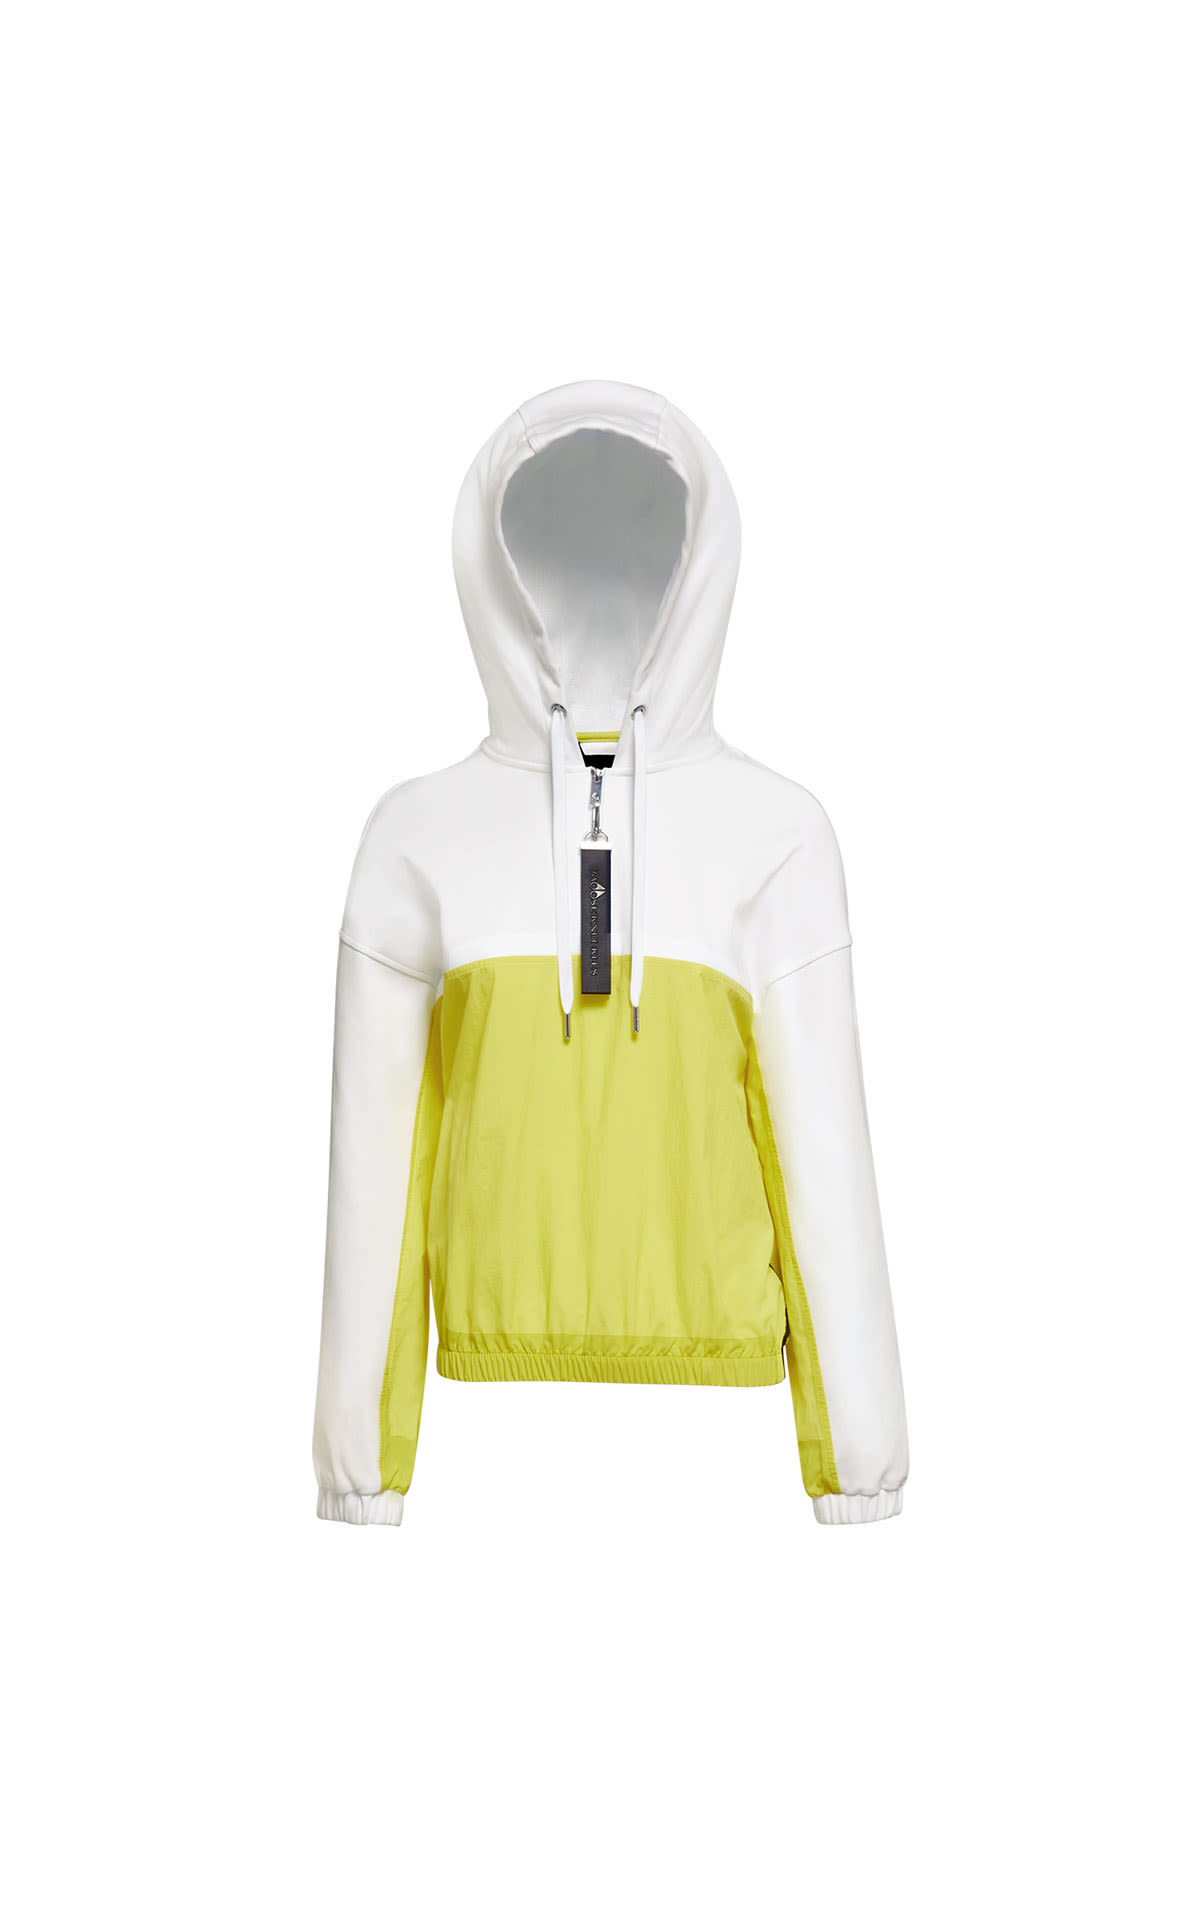 Moose Knuckles  Ataris ladies hoodie white and yellow from Bicester Village